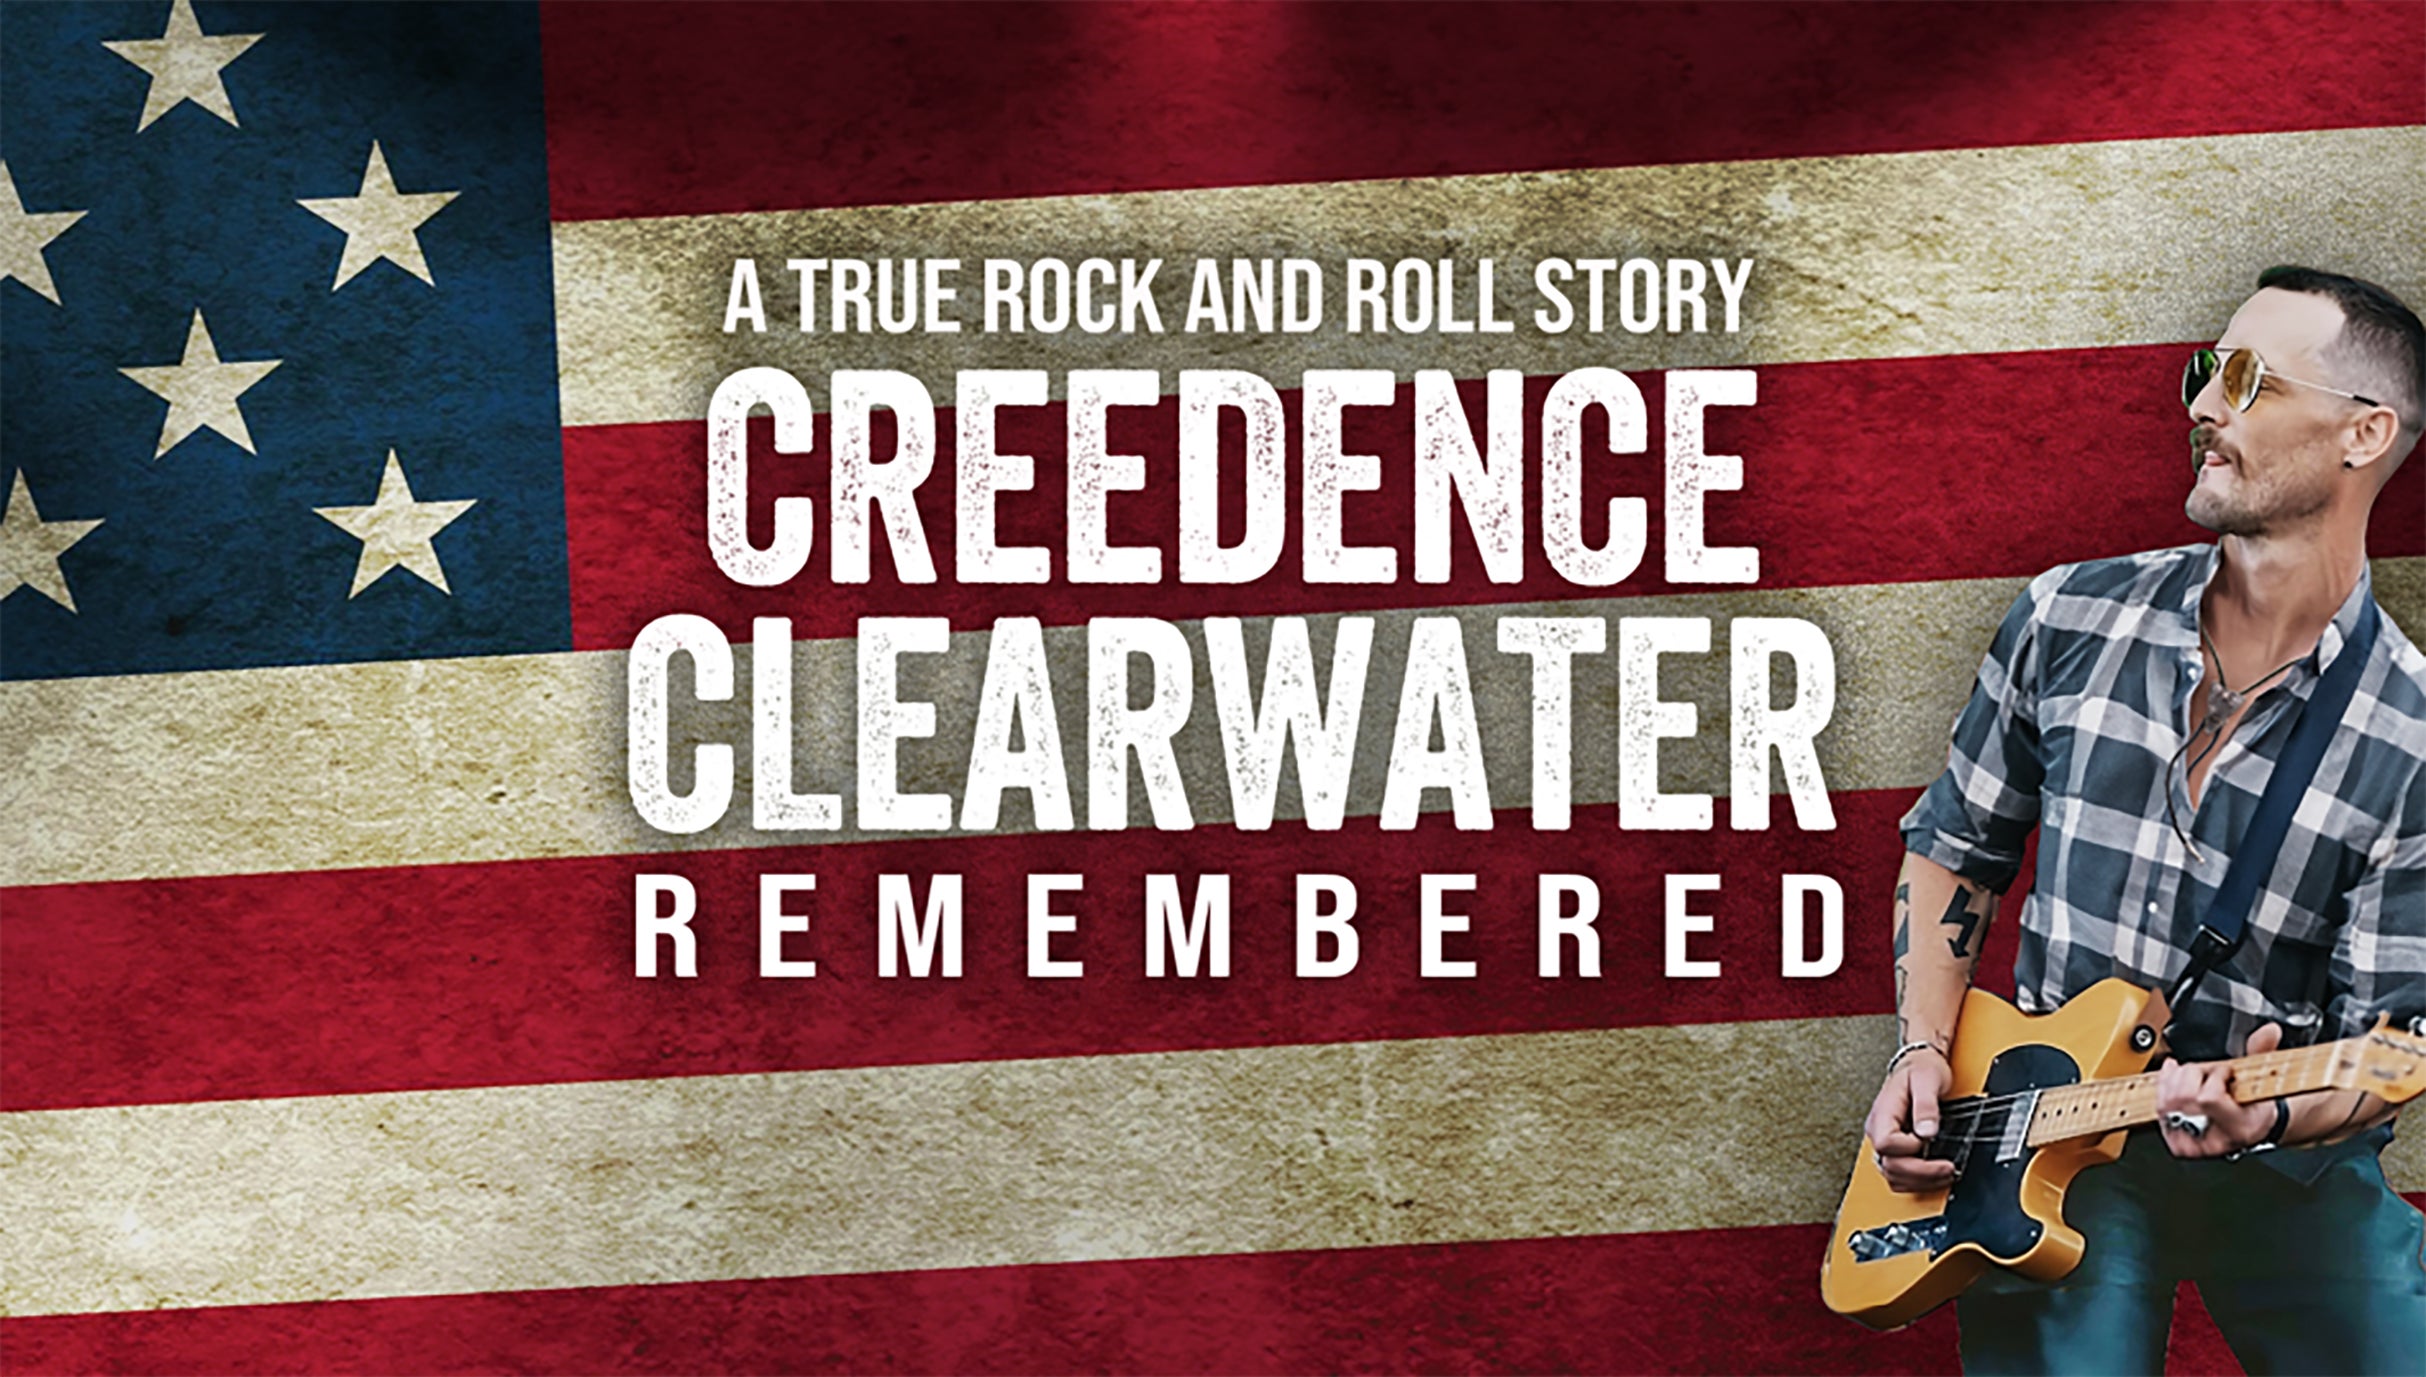 Credence Clearwater Remembered - A True Rock and Roll Story in Calgary promo photo for Exclusive presale offer code